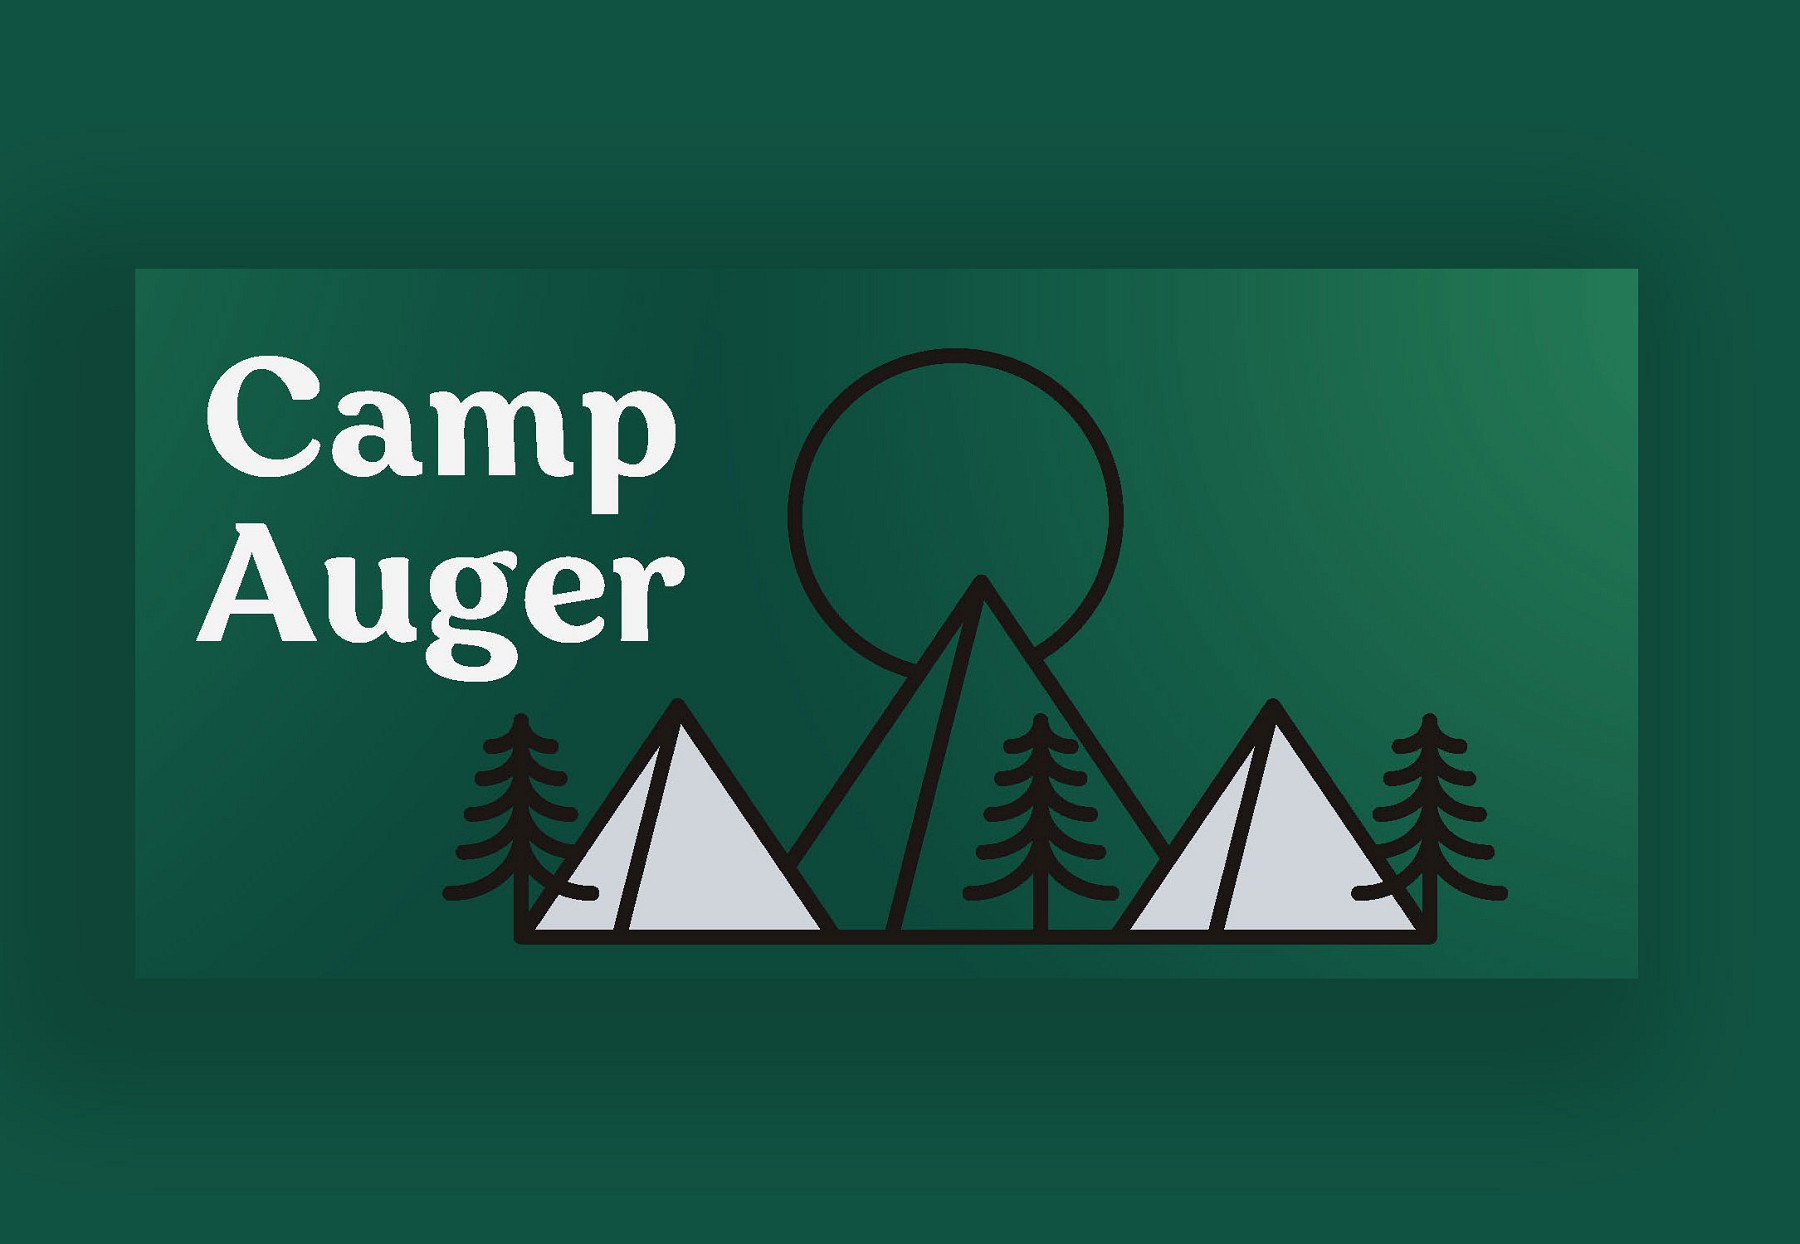 Thunder Bay Accessible Camp - Camp Auger